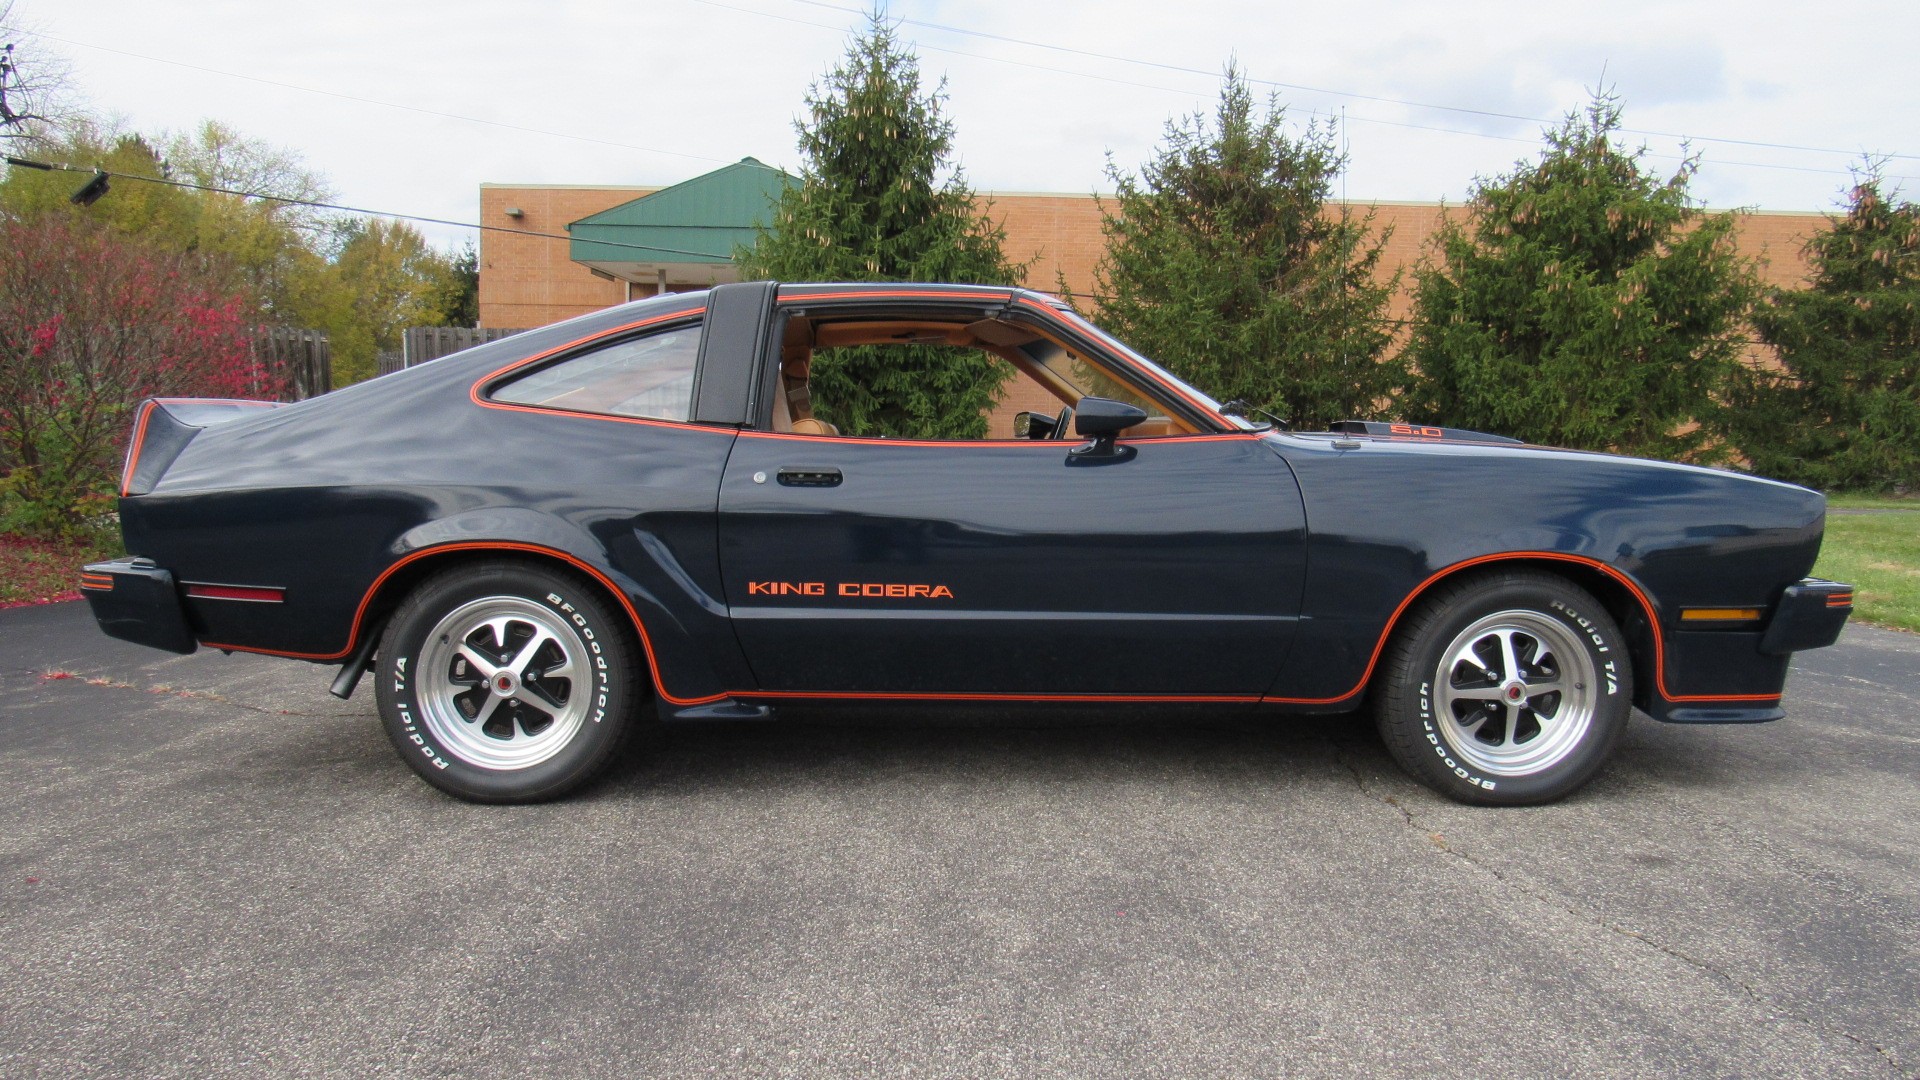 1978 Ford King Cobra Mustang, T Tops, 4 Speed, 85K Miles, SOLD!